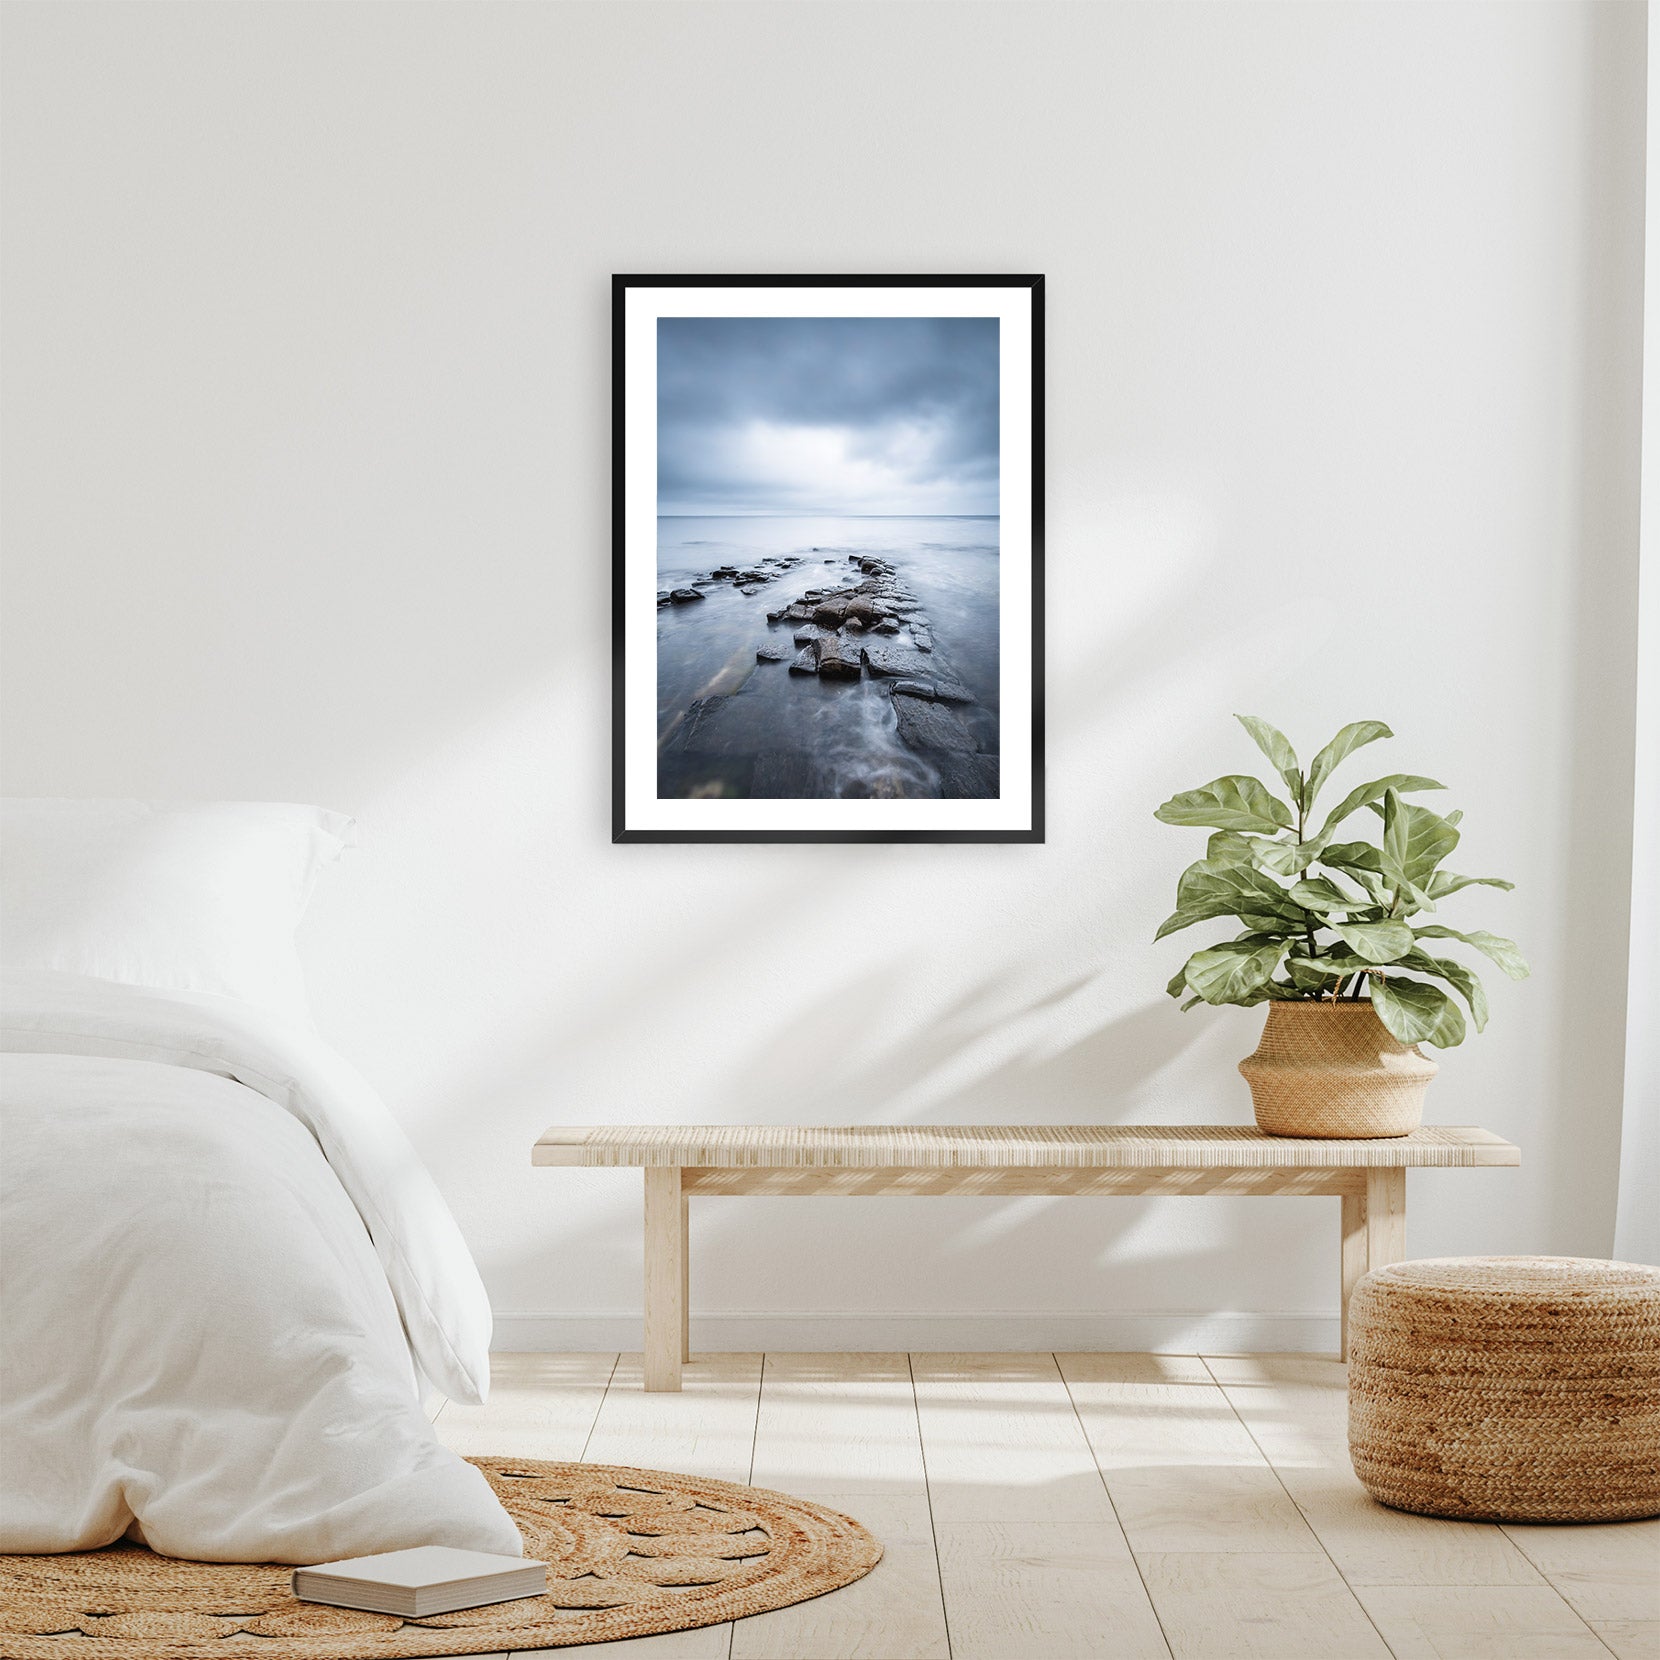 A framed print of a moody seascape in Norway